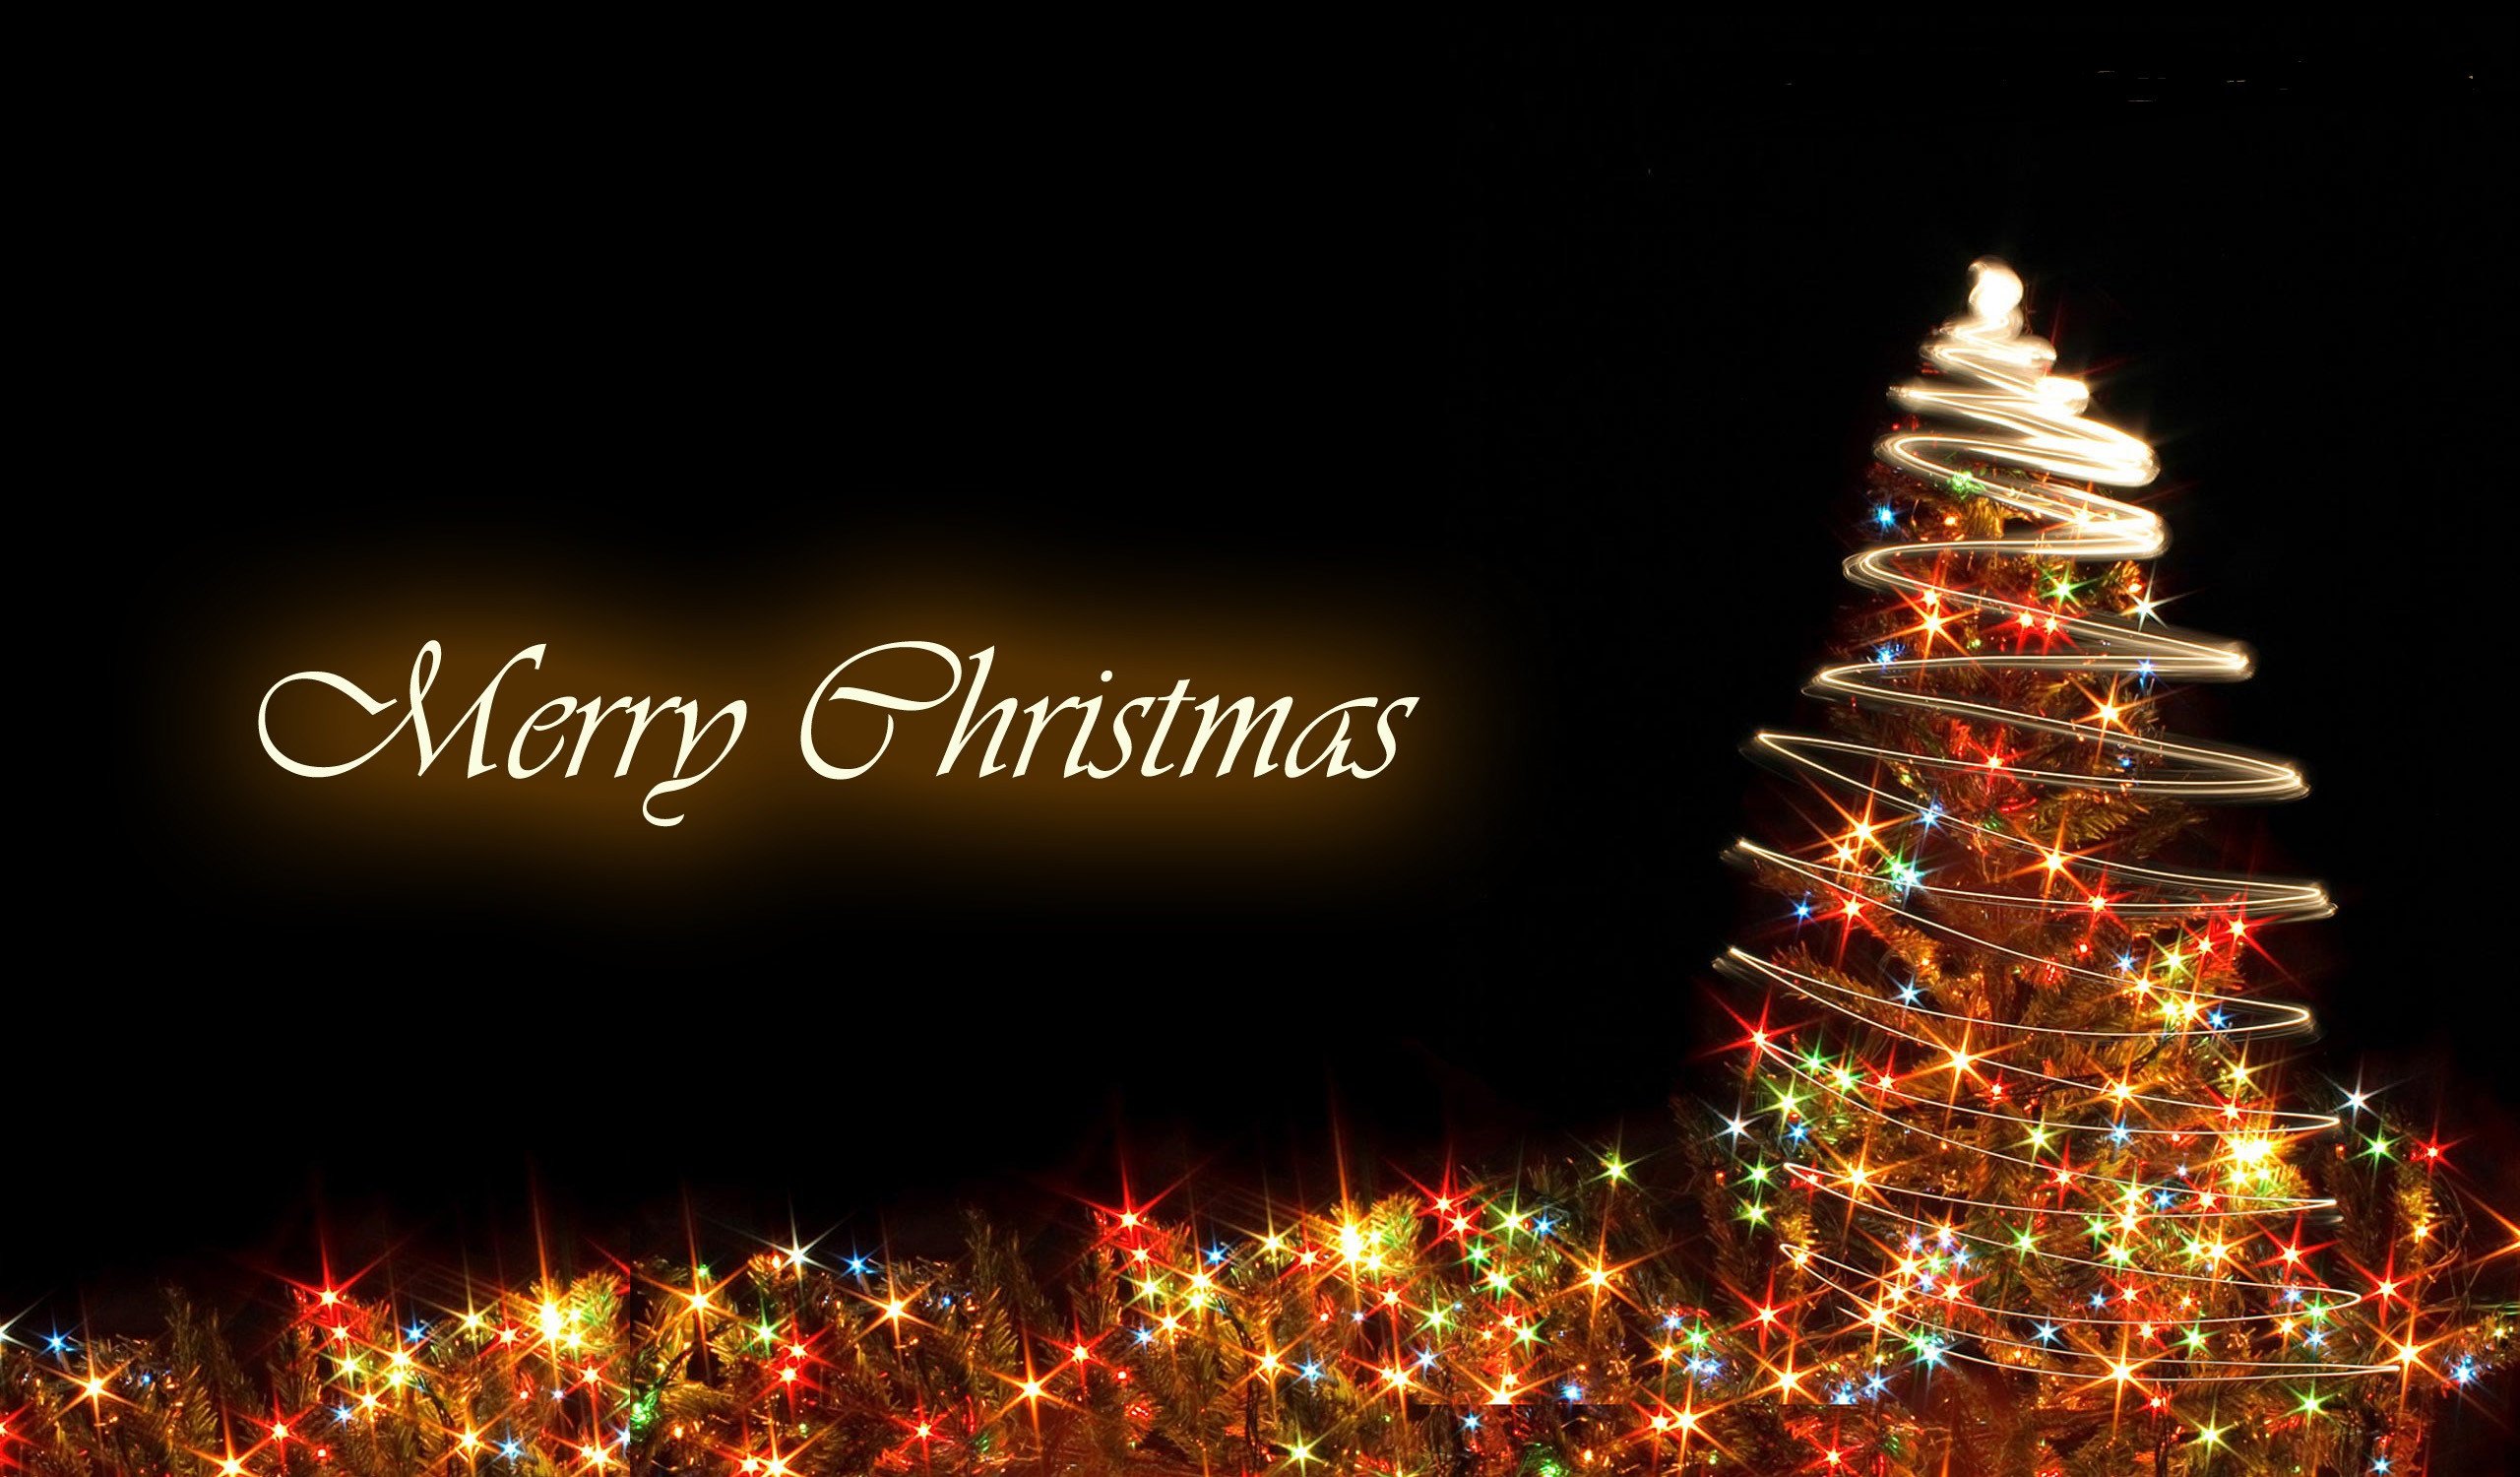 Merry Christmas Wallpapers HD free